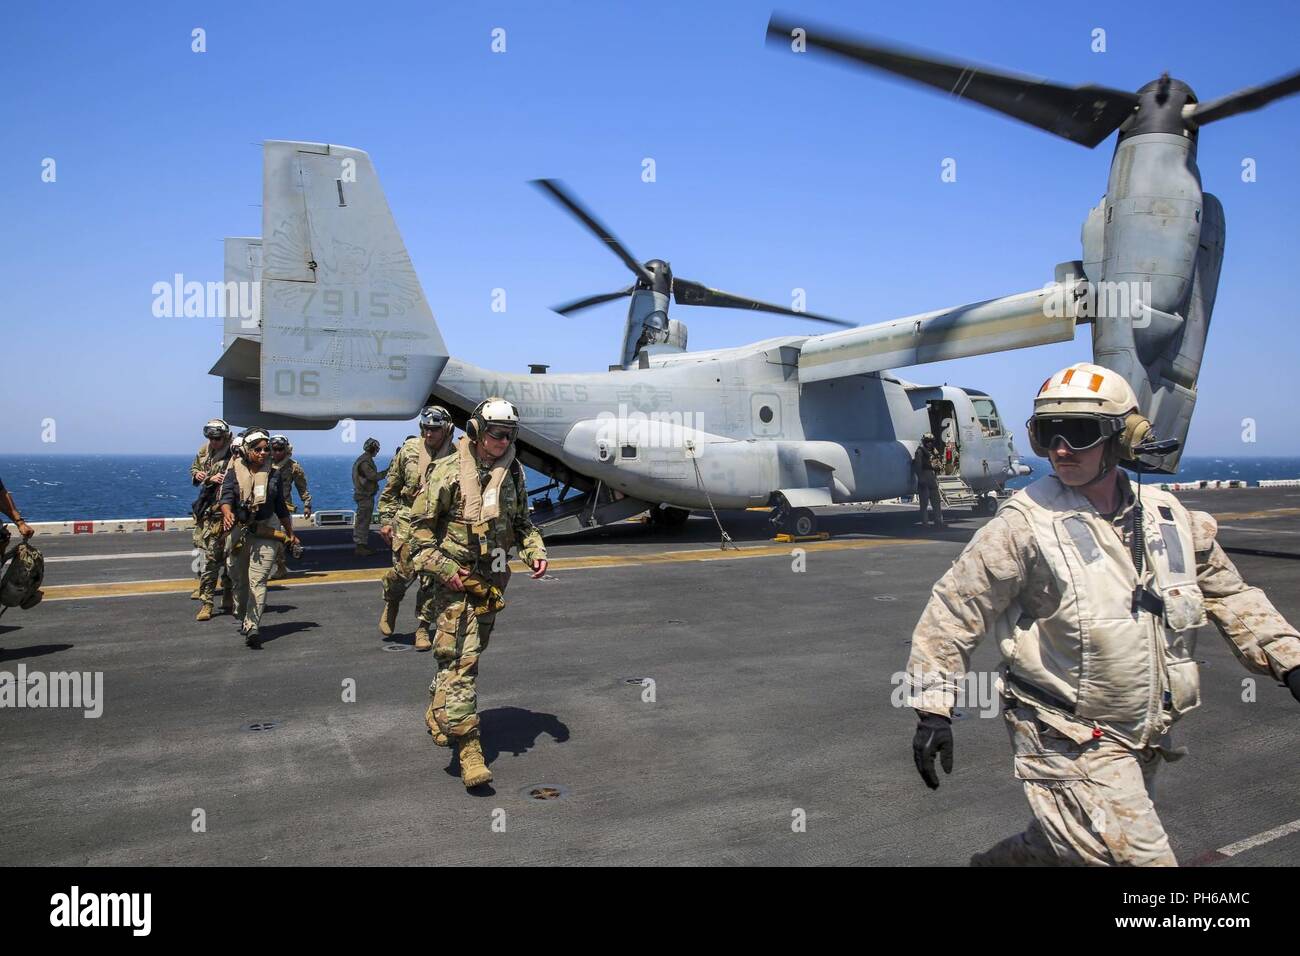 ARABIAN GULF (June 22, 2018) Distinguished visitors debark an MV-22B Osprey aboard the Wasp-class amphibious assault ship USS Iwo Jima (LHD 7), June 22, 2018. U.S. Army Gen. Joseph Votel, commander, U.S. Central Command, U.S. Navy Vice Adm. Scott Stearney, commander, U.S. Naval Forces Central Command, and other distinguished visitors took a tour ofIwo Jima and spoke with crew members and Marines with the 26th Marine Expeditionary Unit, who are currently deployed to the U.S. 5th Fleet of operations in support of maritime security operations to reassure allies and partners and preserve the freed Stock Photo